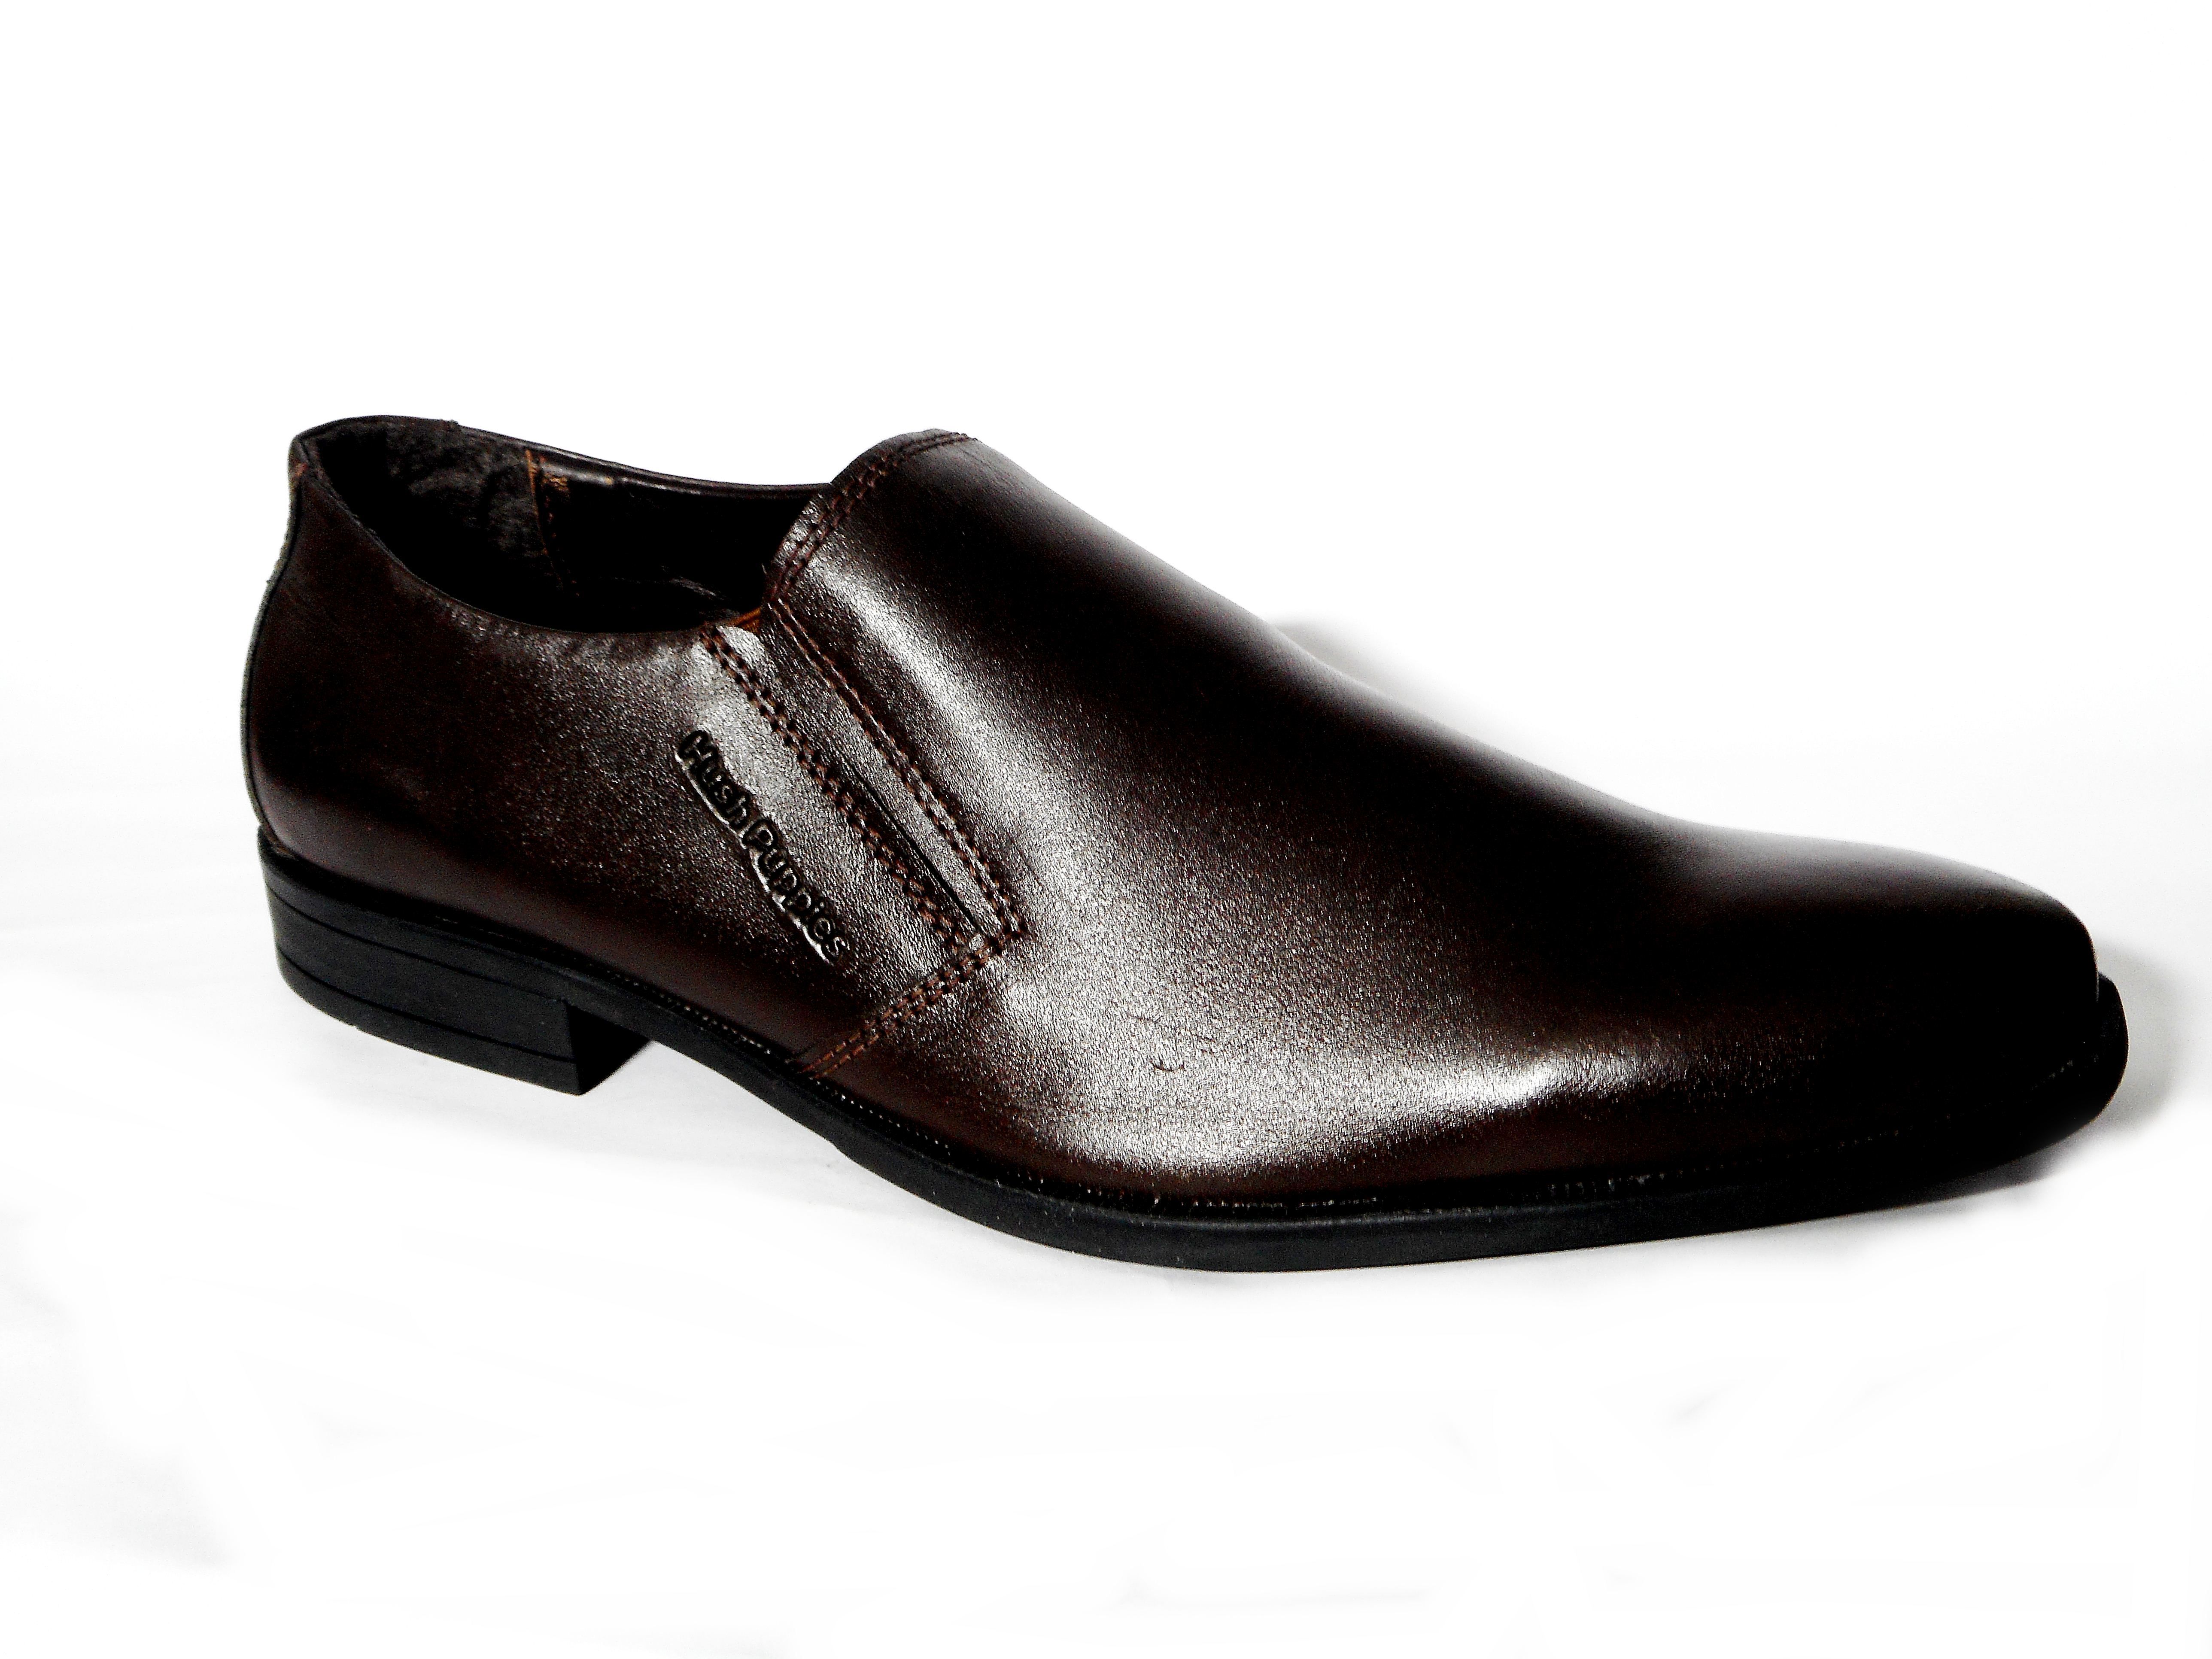 hush puppies formal leather shoes